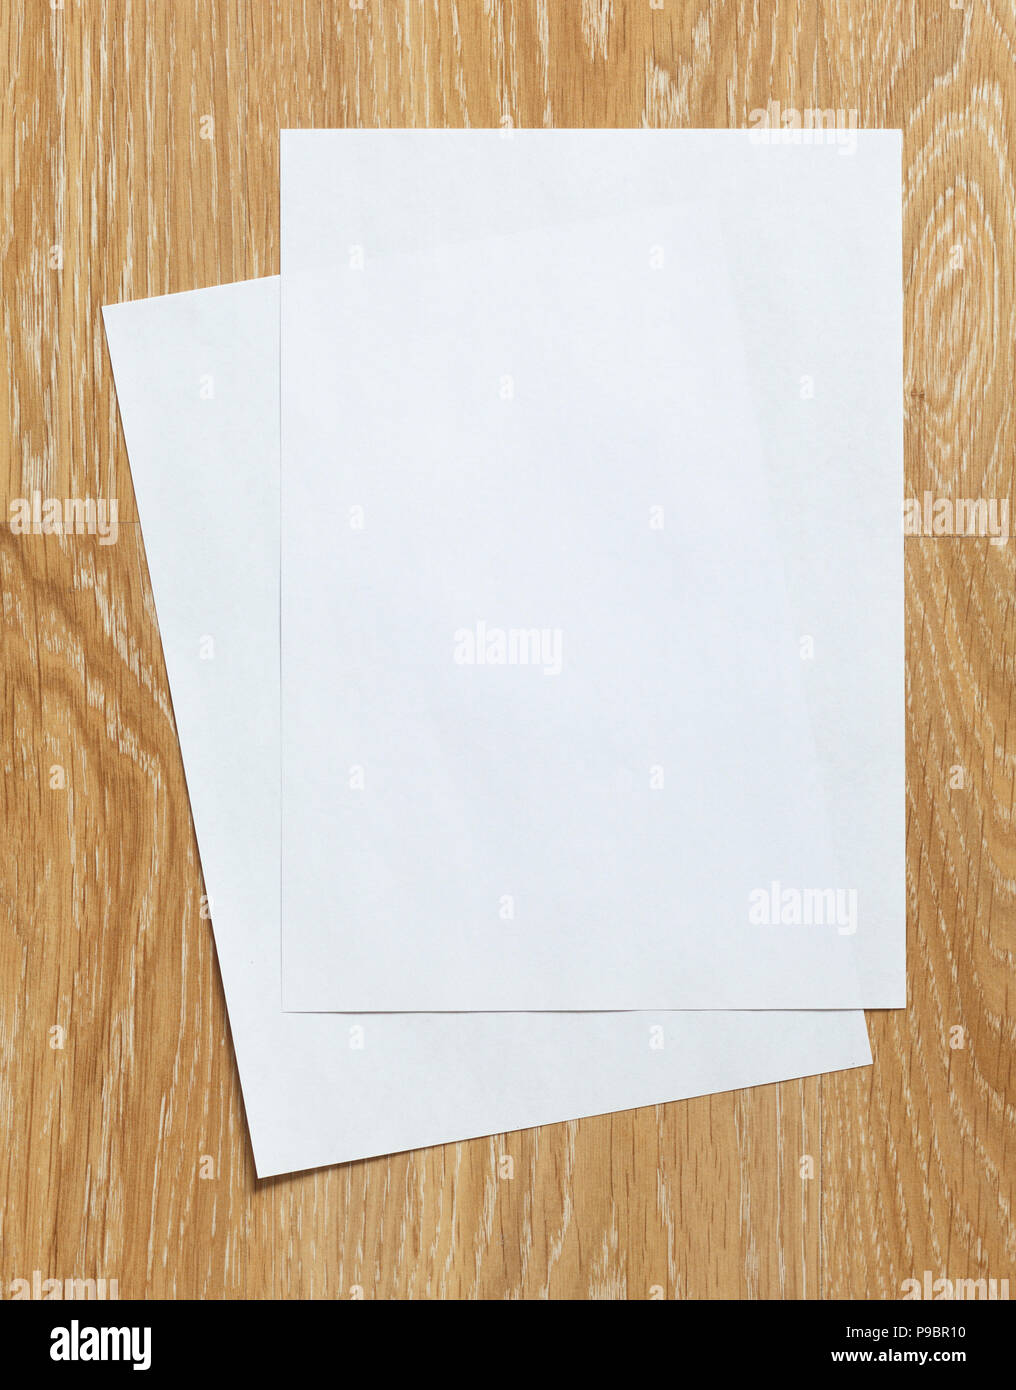 Two of blank sheets of paper portrait orientation  on wooden background Stock Photo